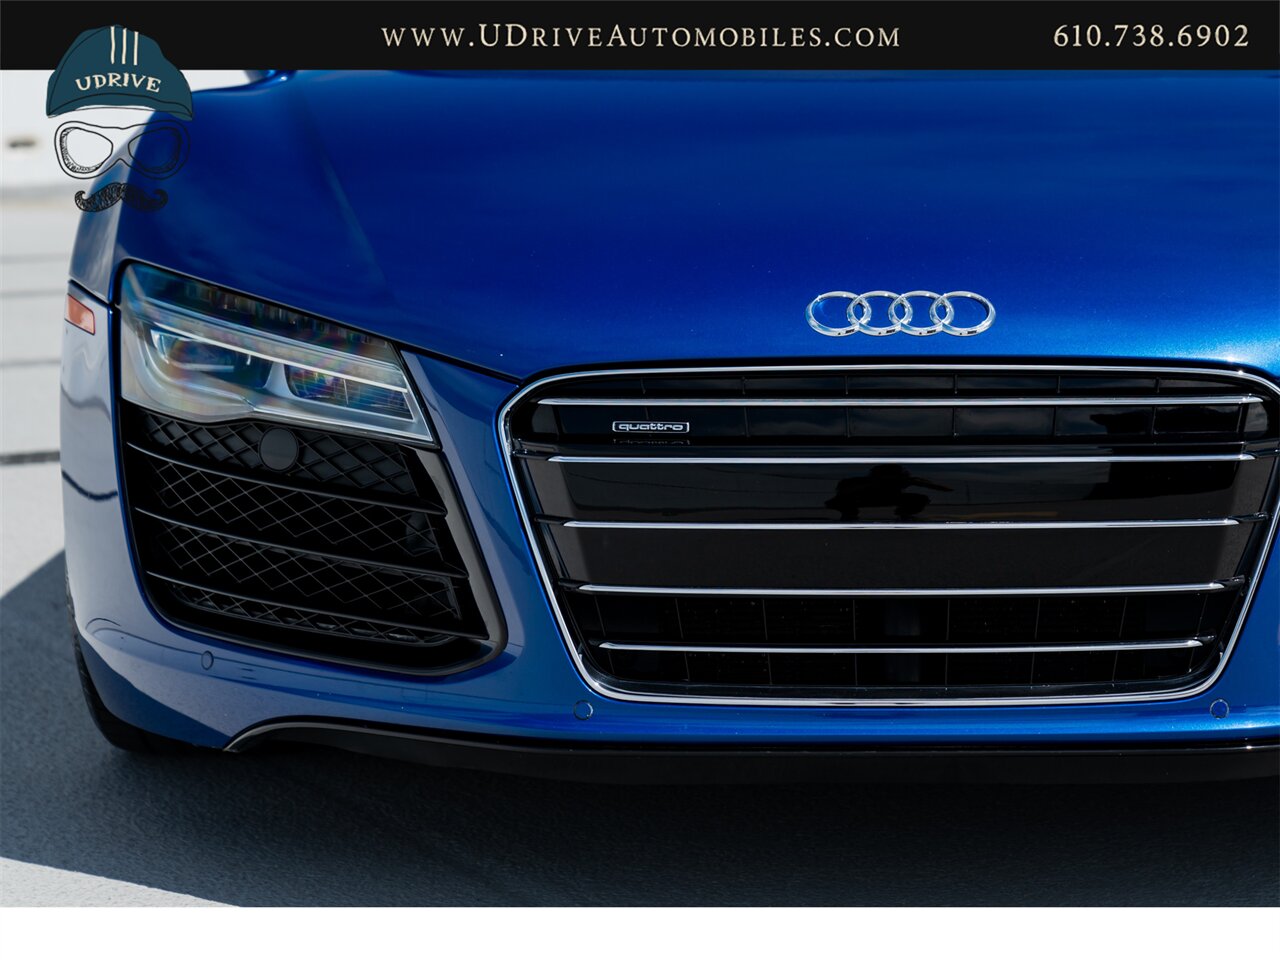 2015 Audi R8 5.2 V10 Quattro 6 Speed Manual 10k Miles  Diamond Stitched Leather 1 of 2 - Photo 13 - West Chester, PA 19382